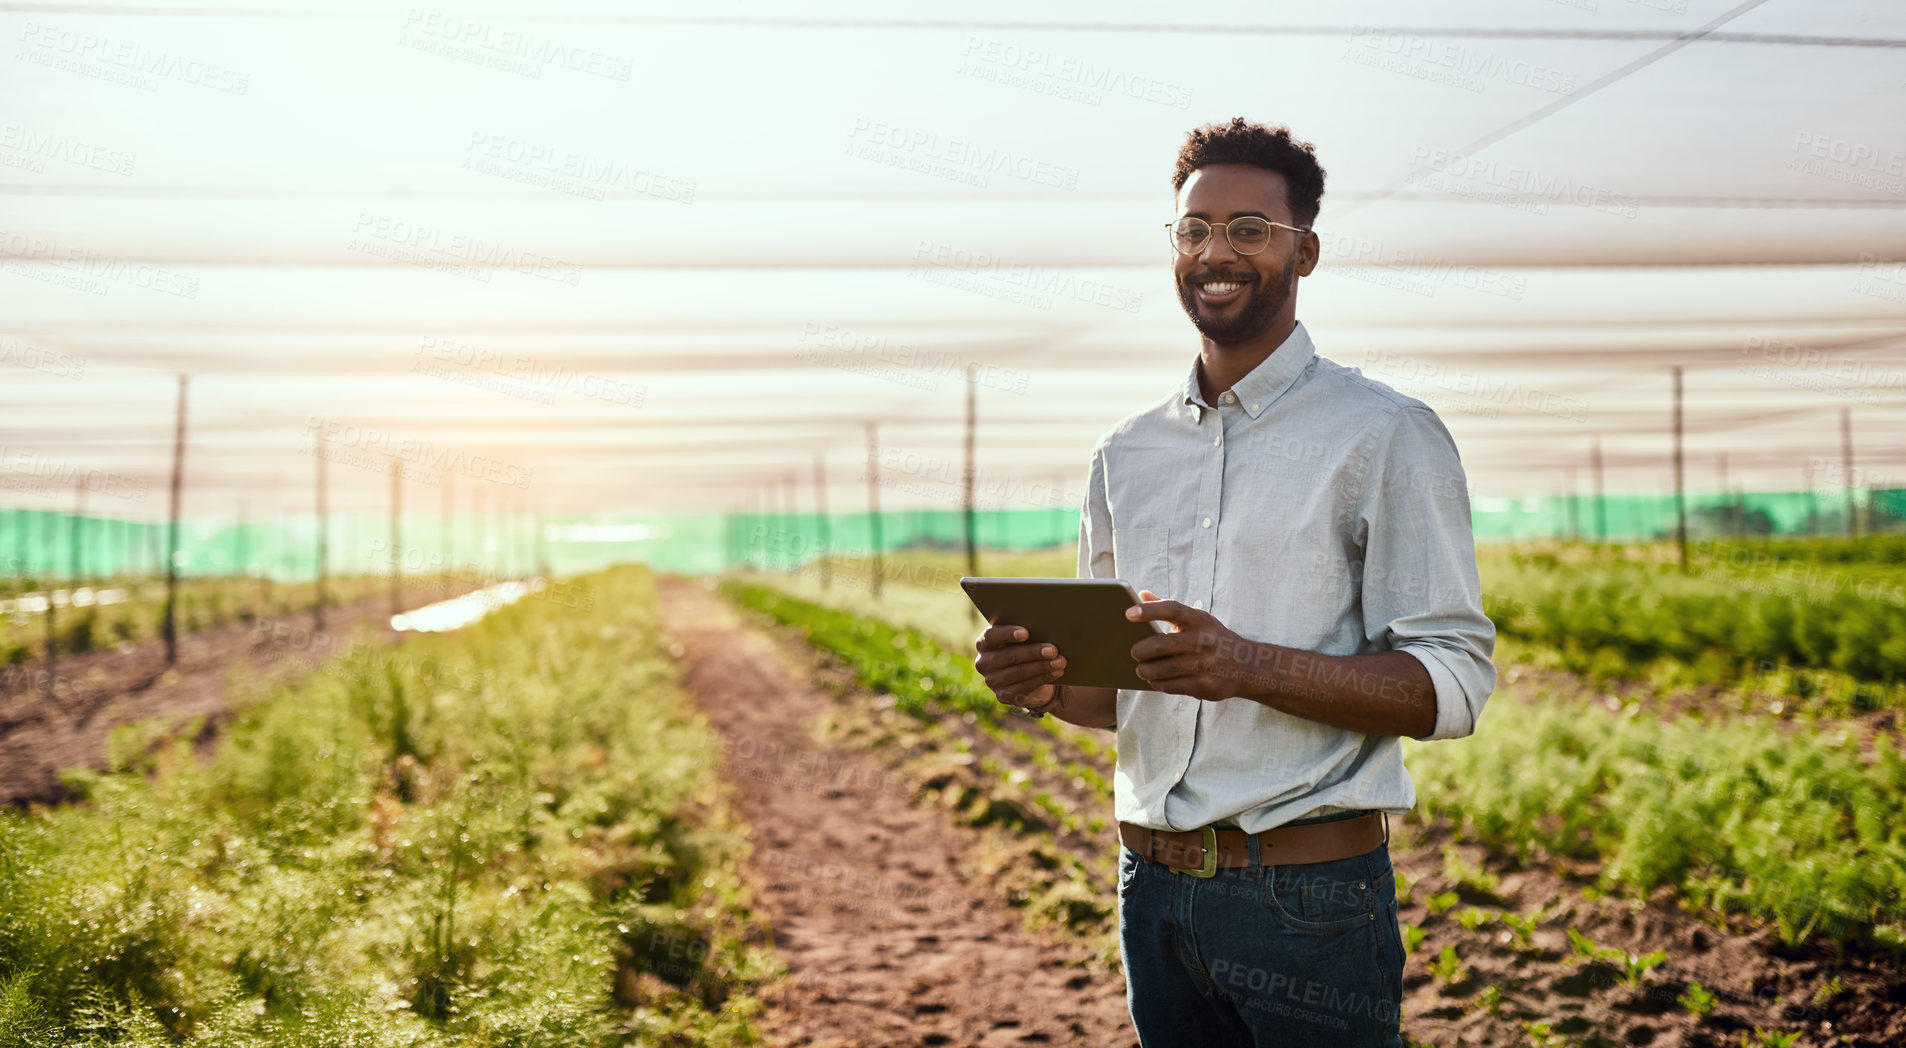 Buy stock photo Modern farmer working on a tablet on a farm and checking plants growth progress with an online app or agriculture management software. Businessman doing inspection of carrot harvest or plantation